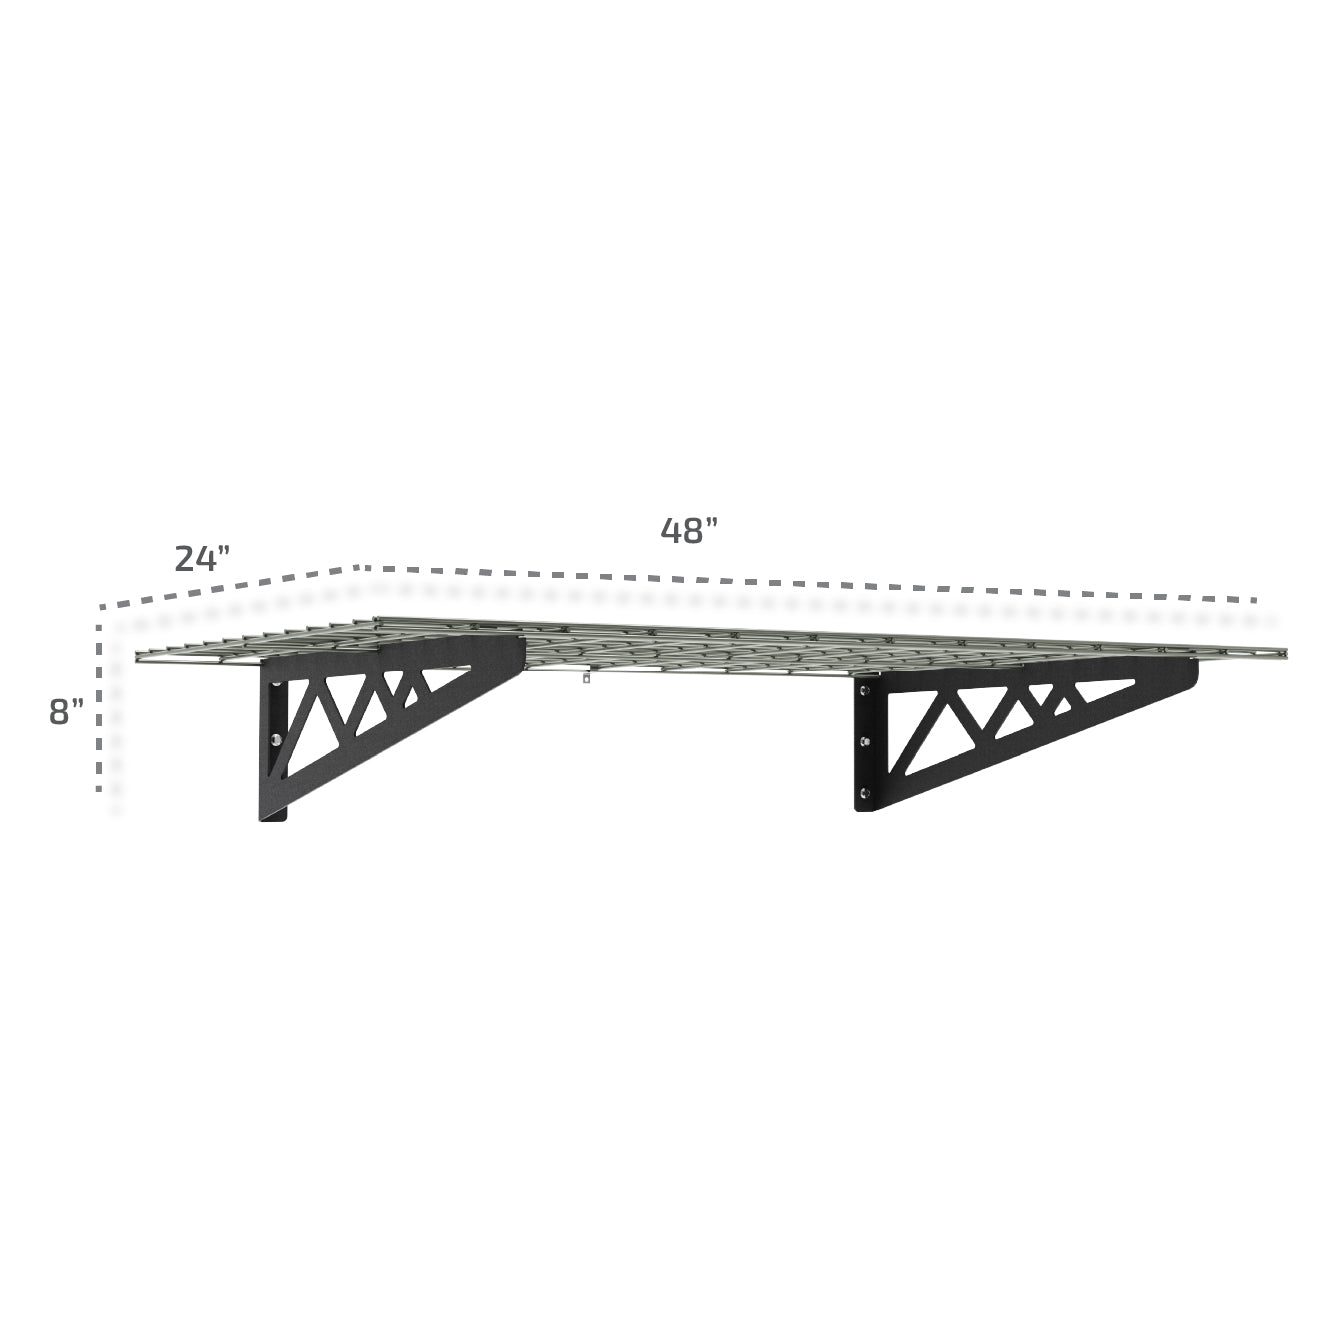 24’ x 48’ Wall Shelves (Two Pack with Hooks) - Mounted